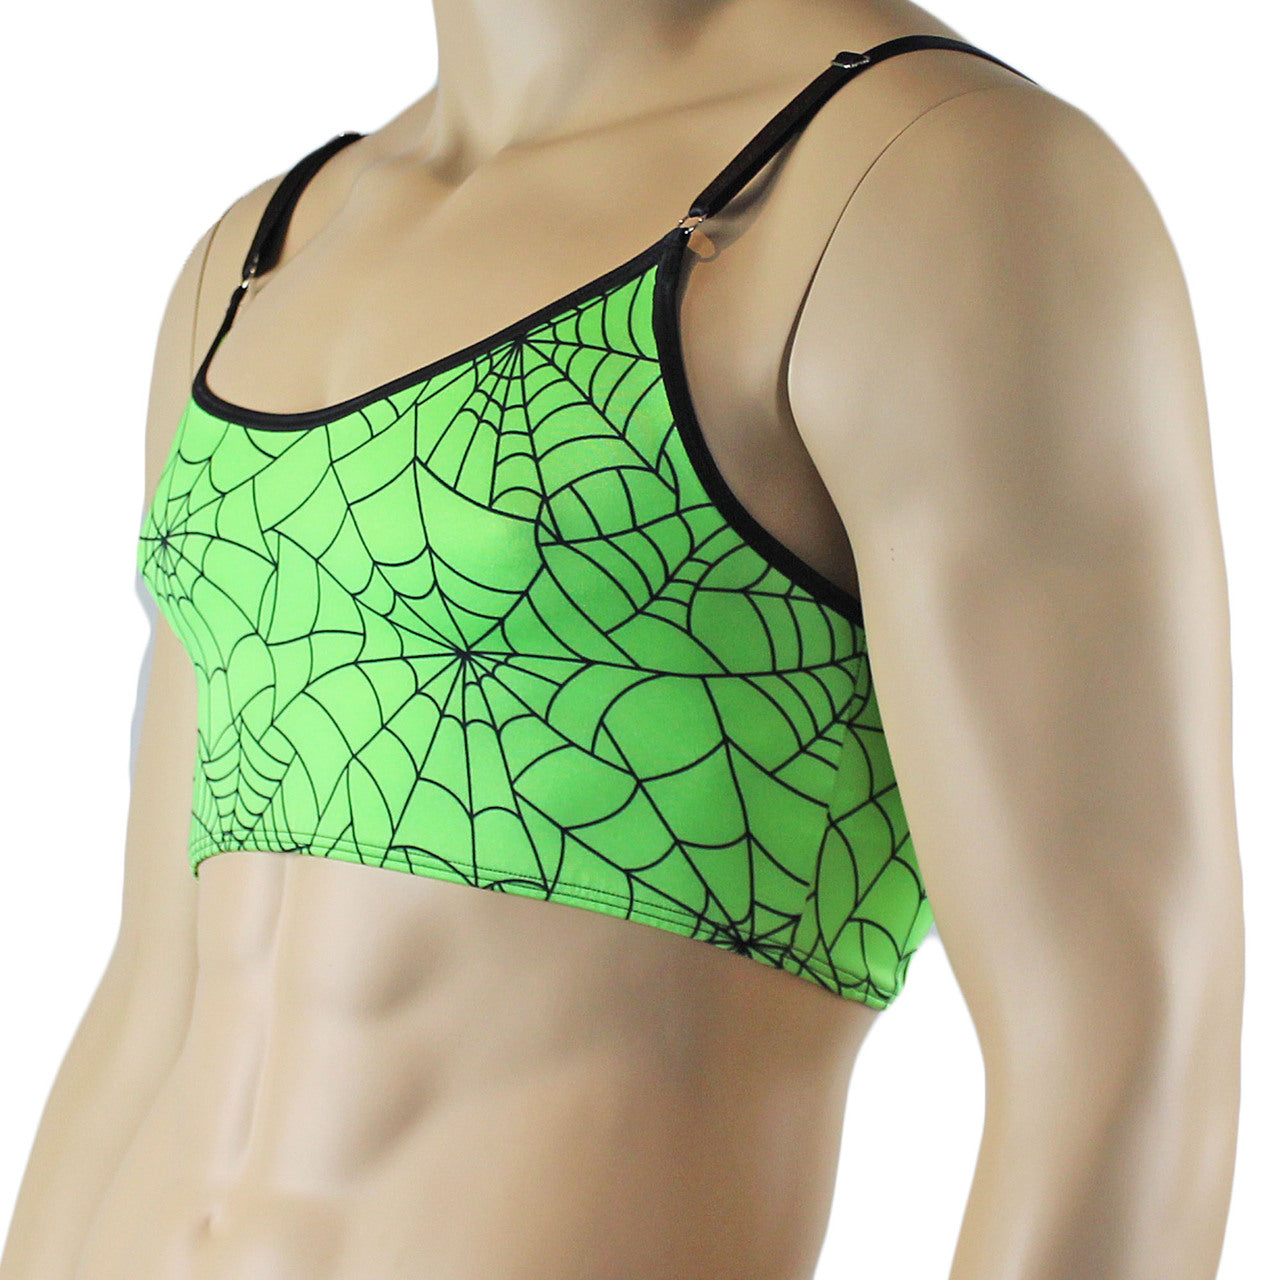 Mens Spider Web Camisole Bra Top Lime Green or Hot Pink